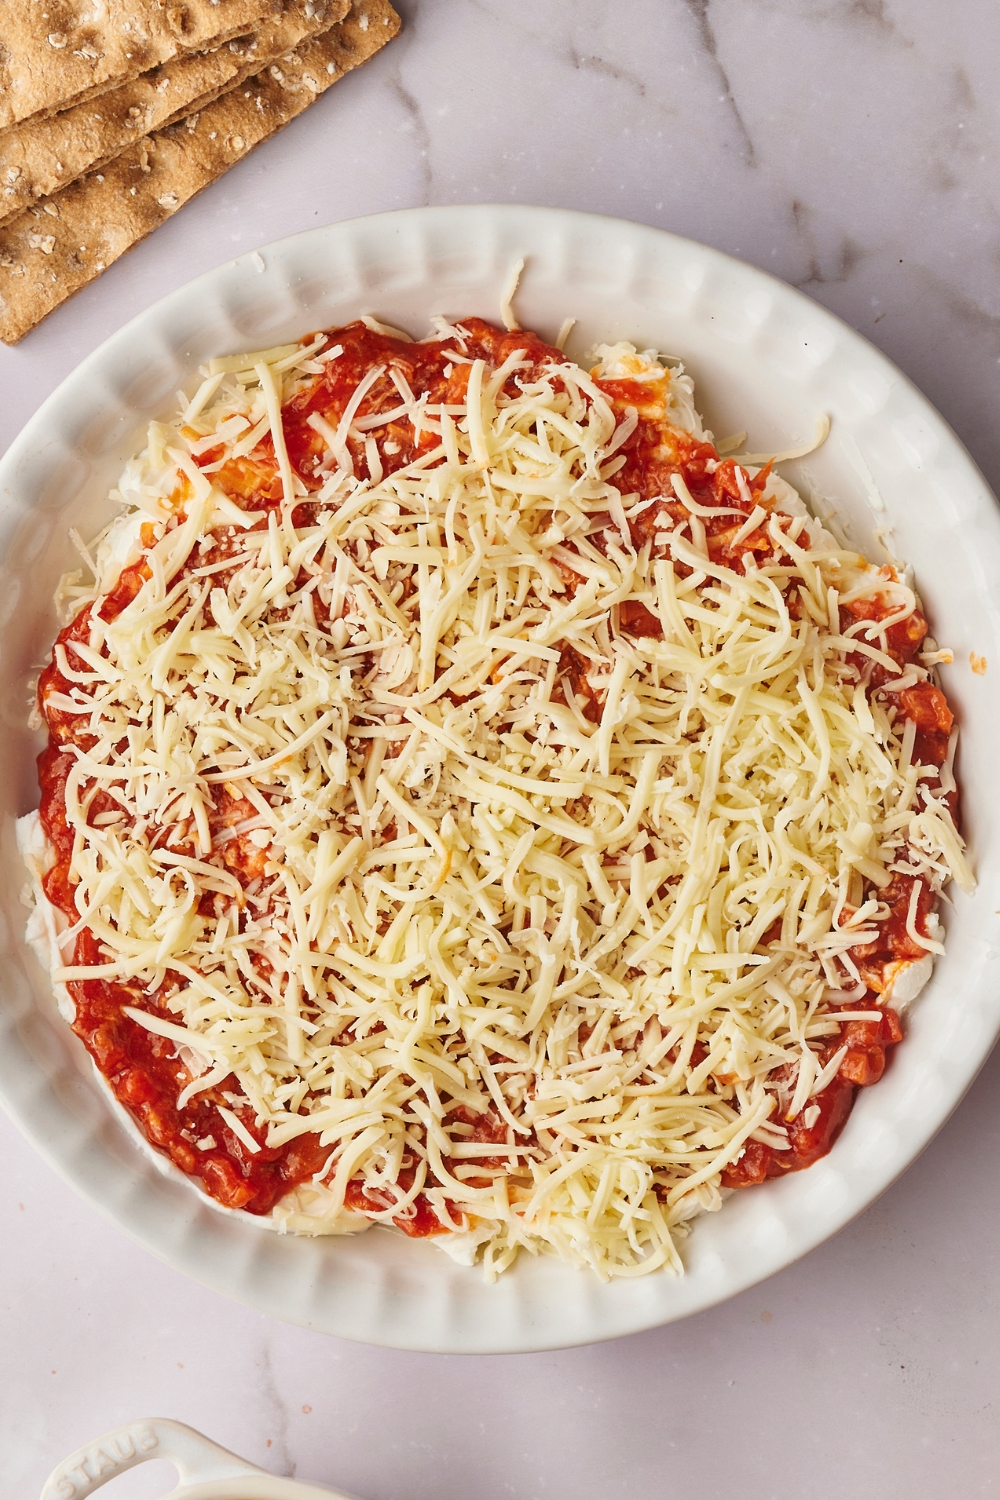 A pie dish with a layer of cheese, pizza sauce and another layer of cheese.